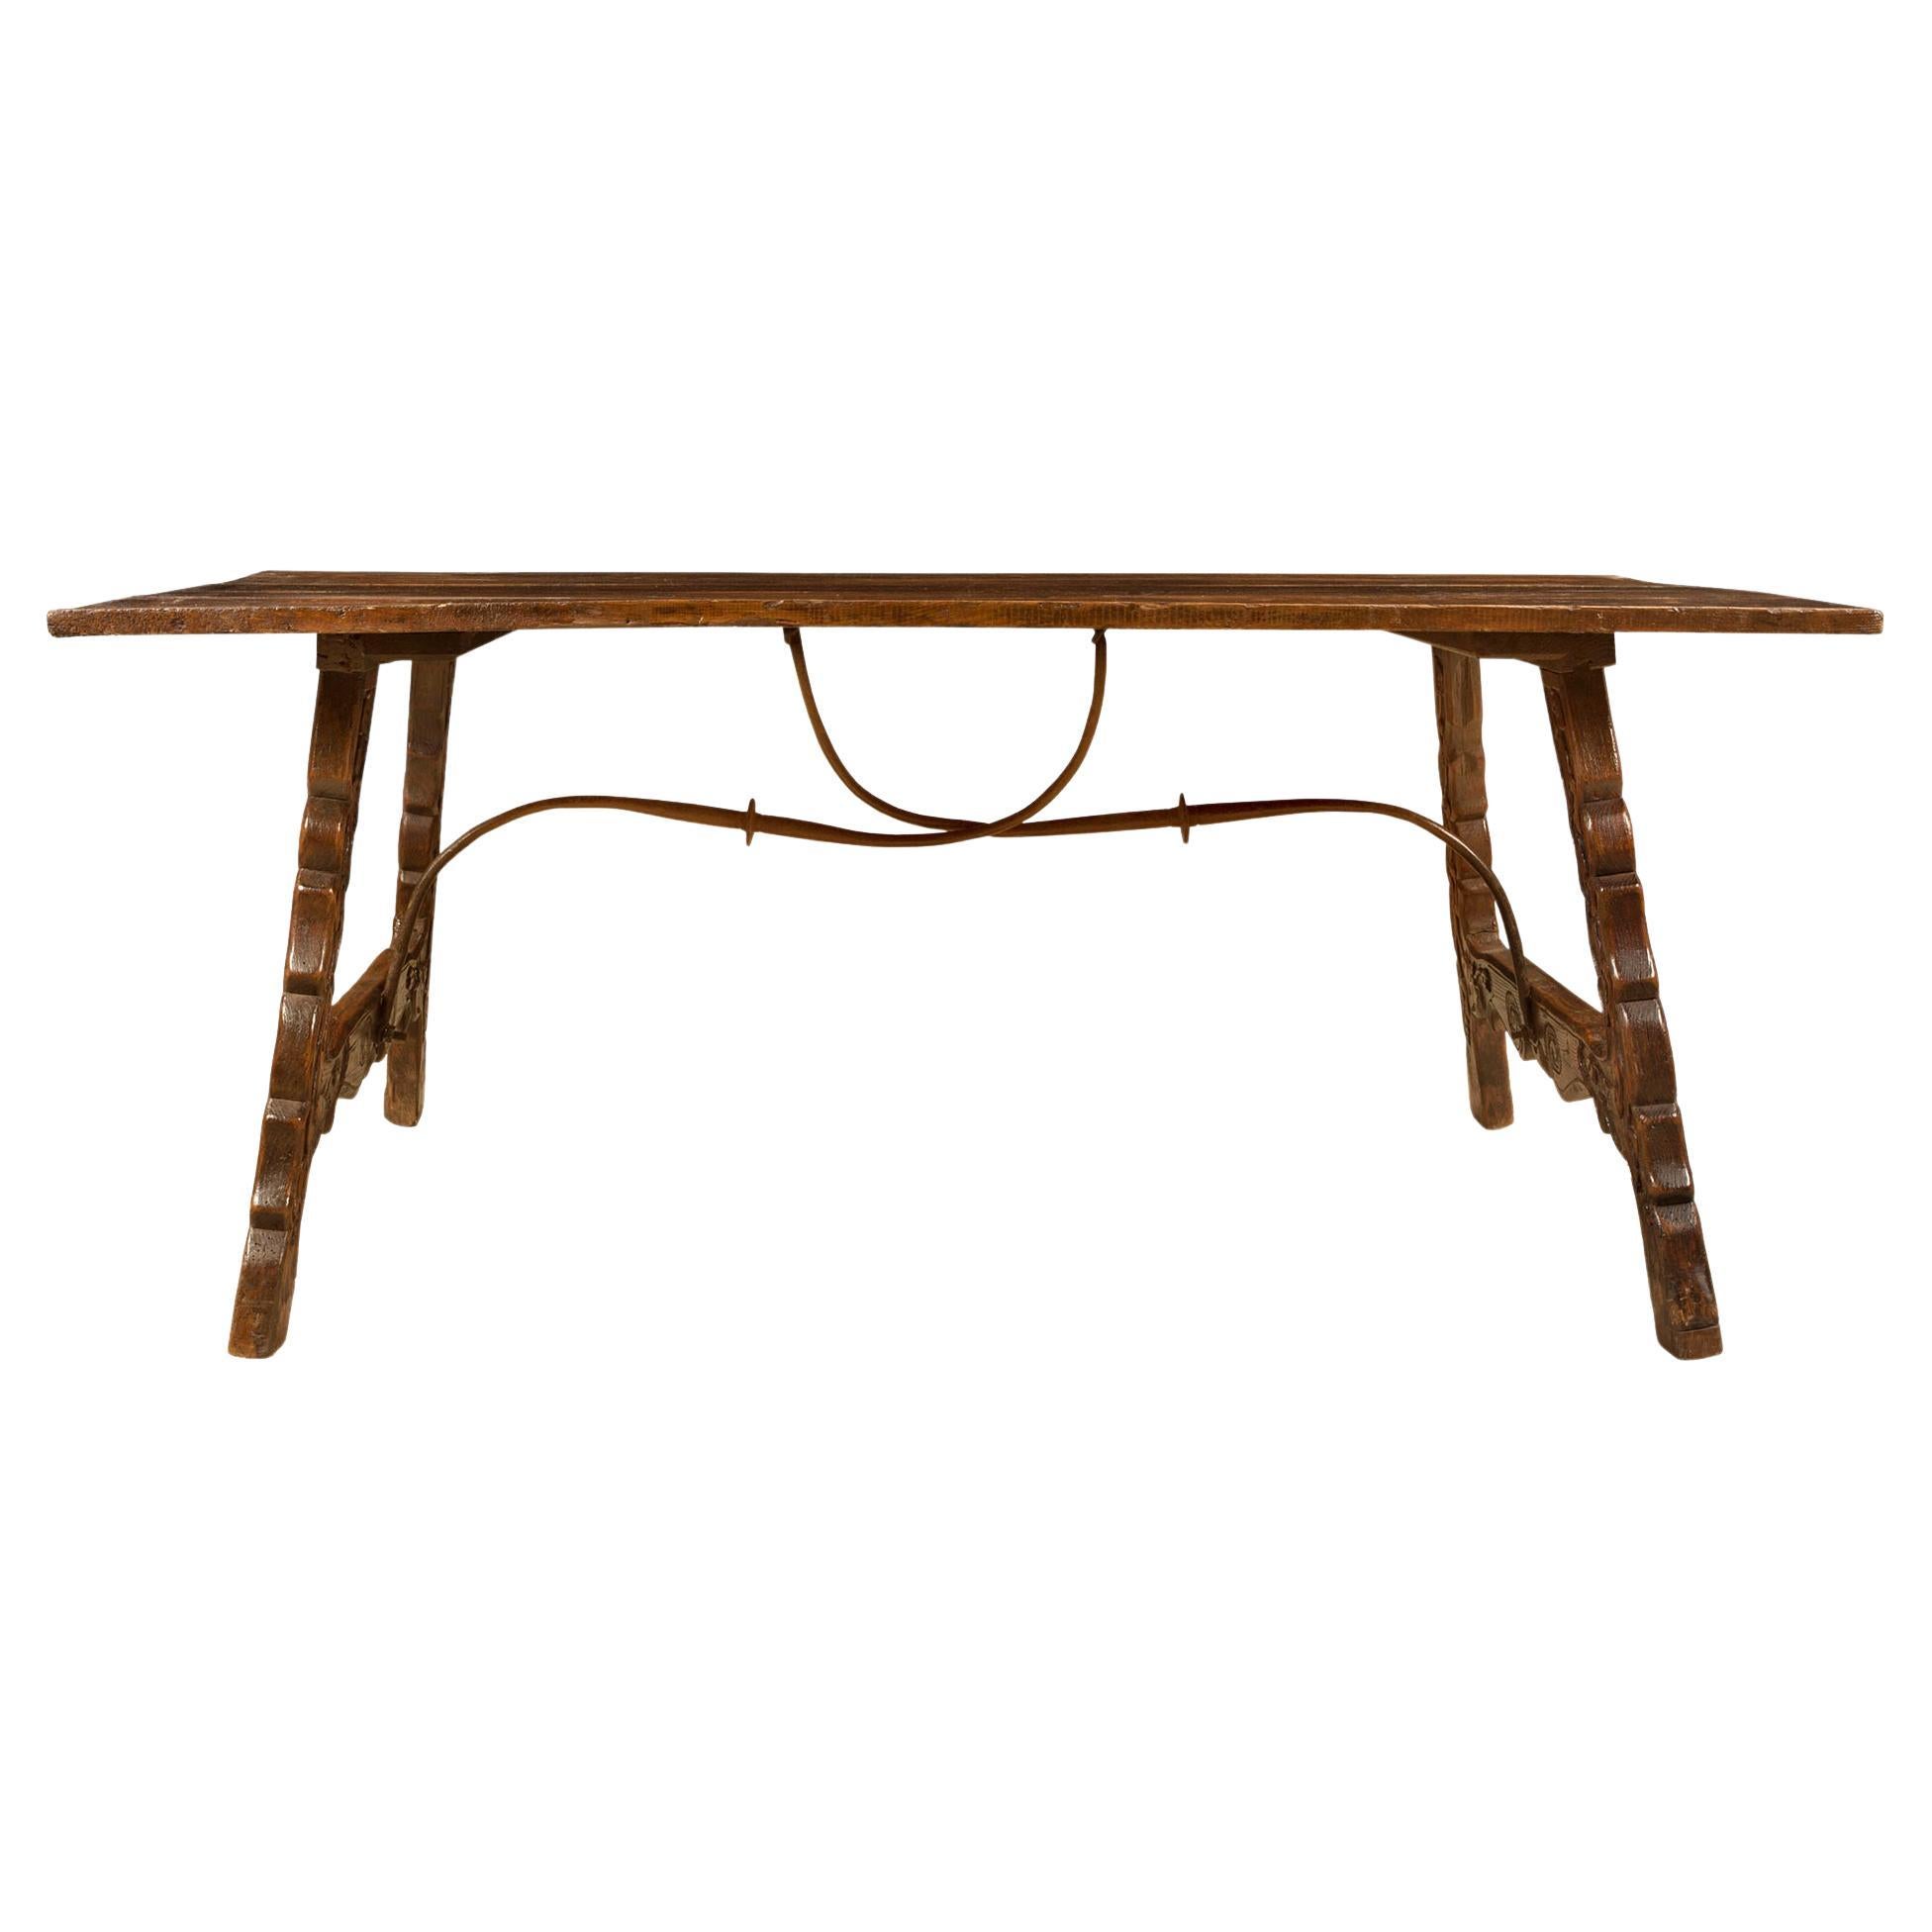 Spanish Mid-19th Century Country Dining/Center Table in Dark Patinated Oak For Sale